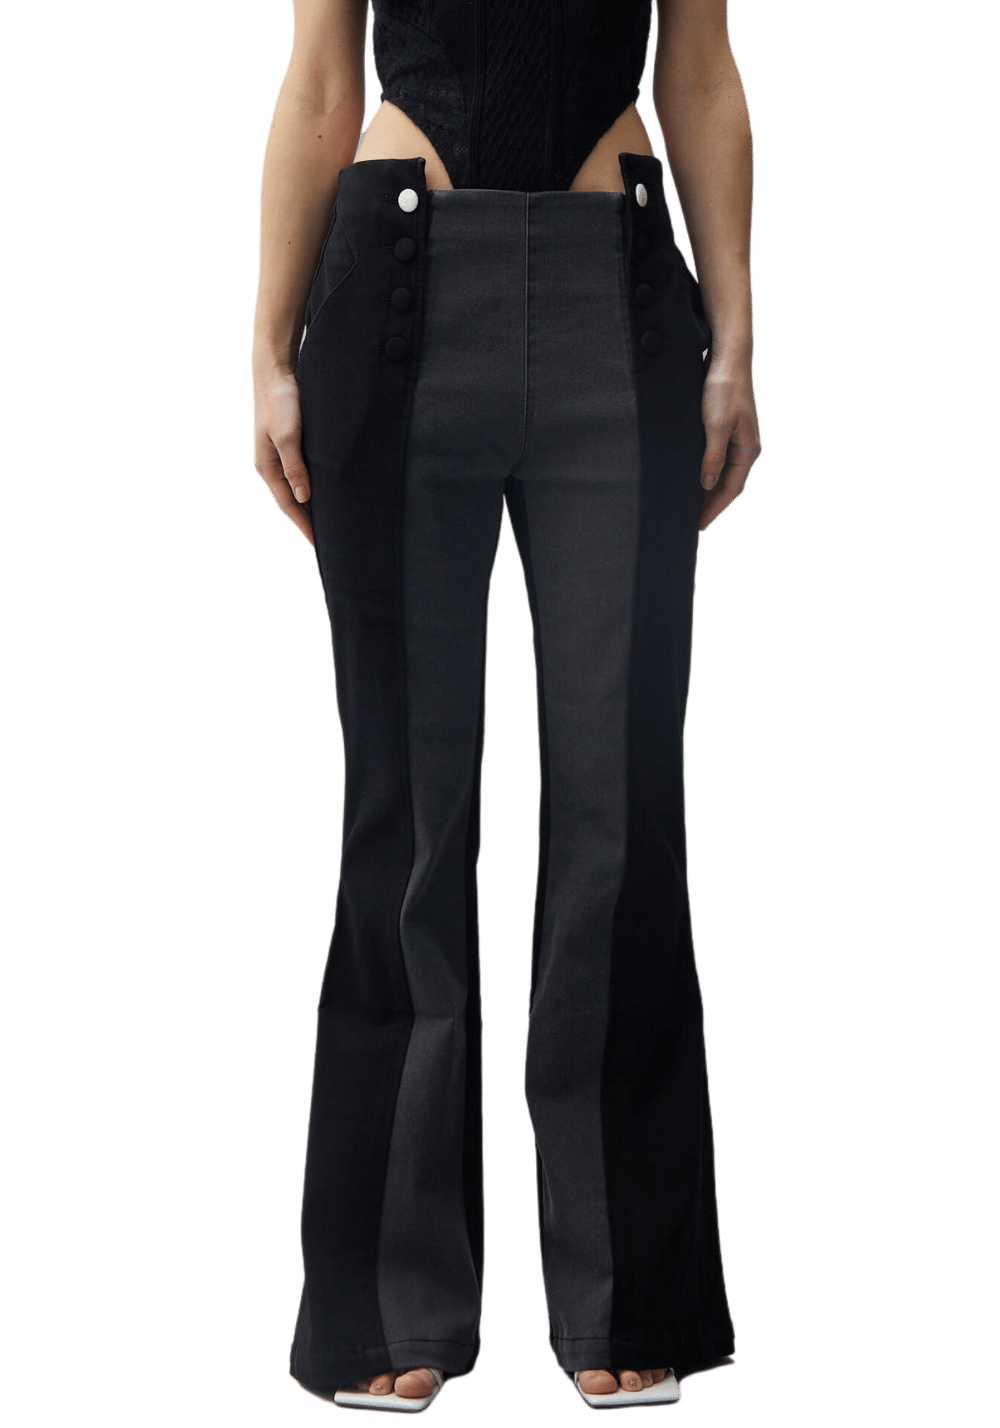 Two Tone Skinny Flared Jeans - PSYLOS 1, Two Tone Skinny Flared Jeans, Pants, Necessary, PSYLOS 1